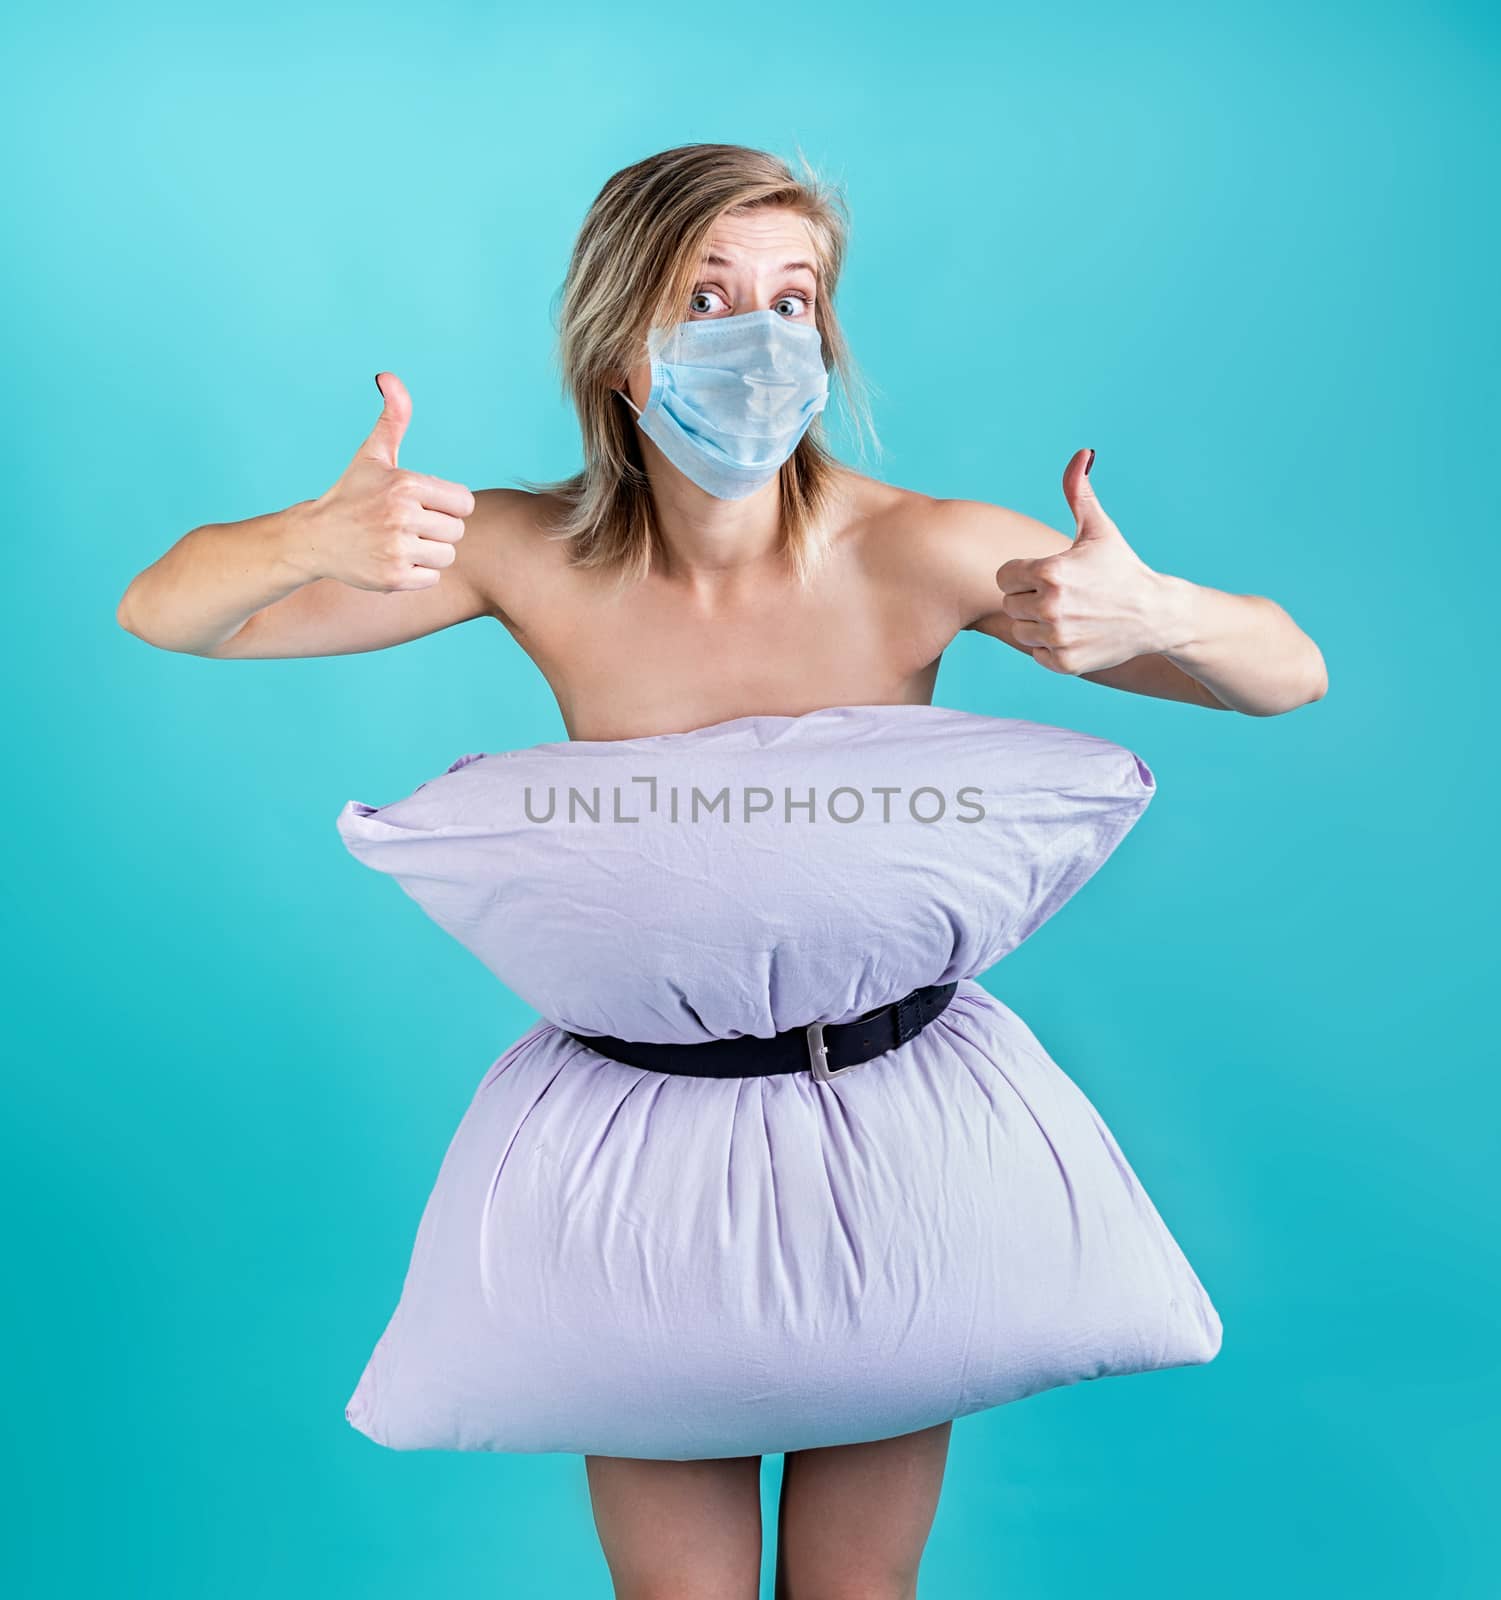 Blond woman in pillowdress wearing a mask showing thumbs up isolated on blue background by Desperada